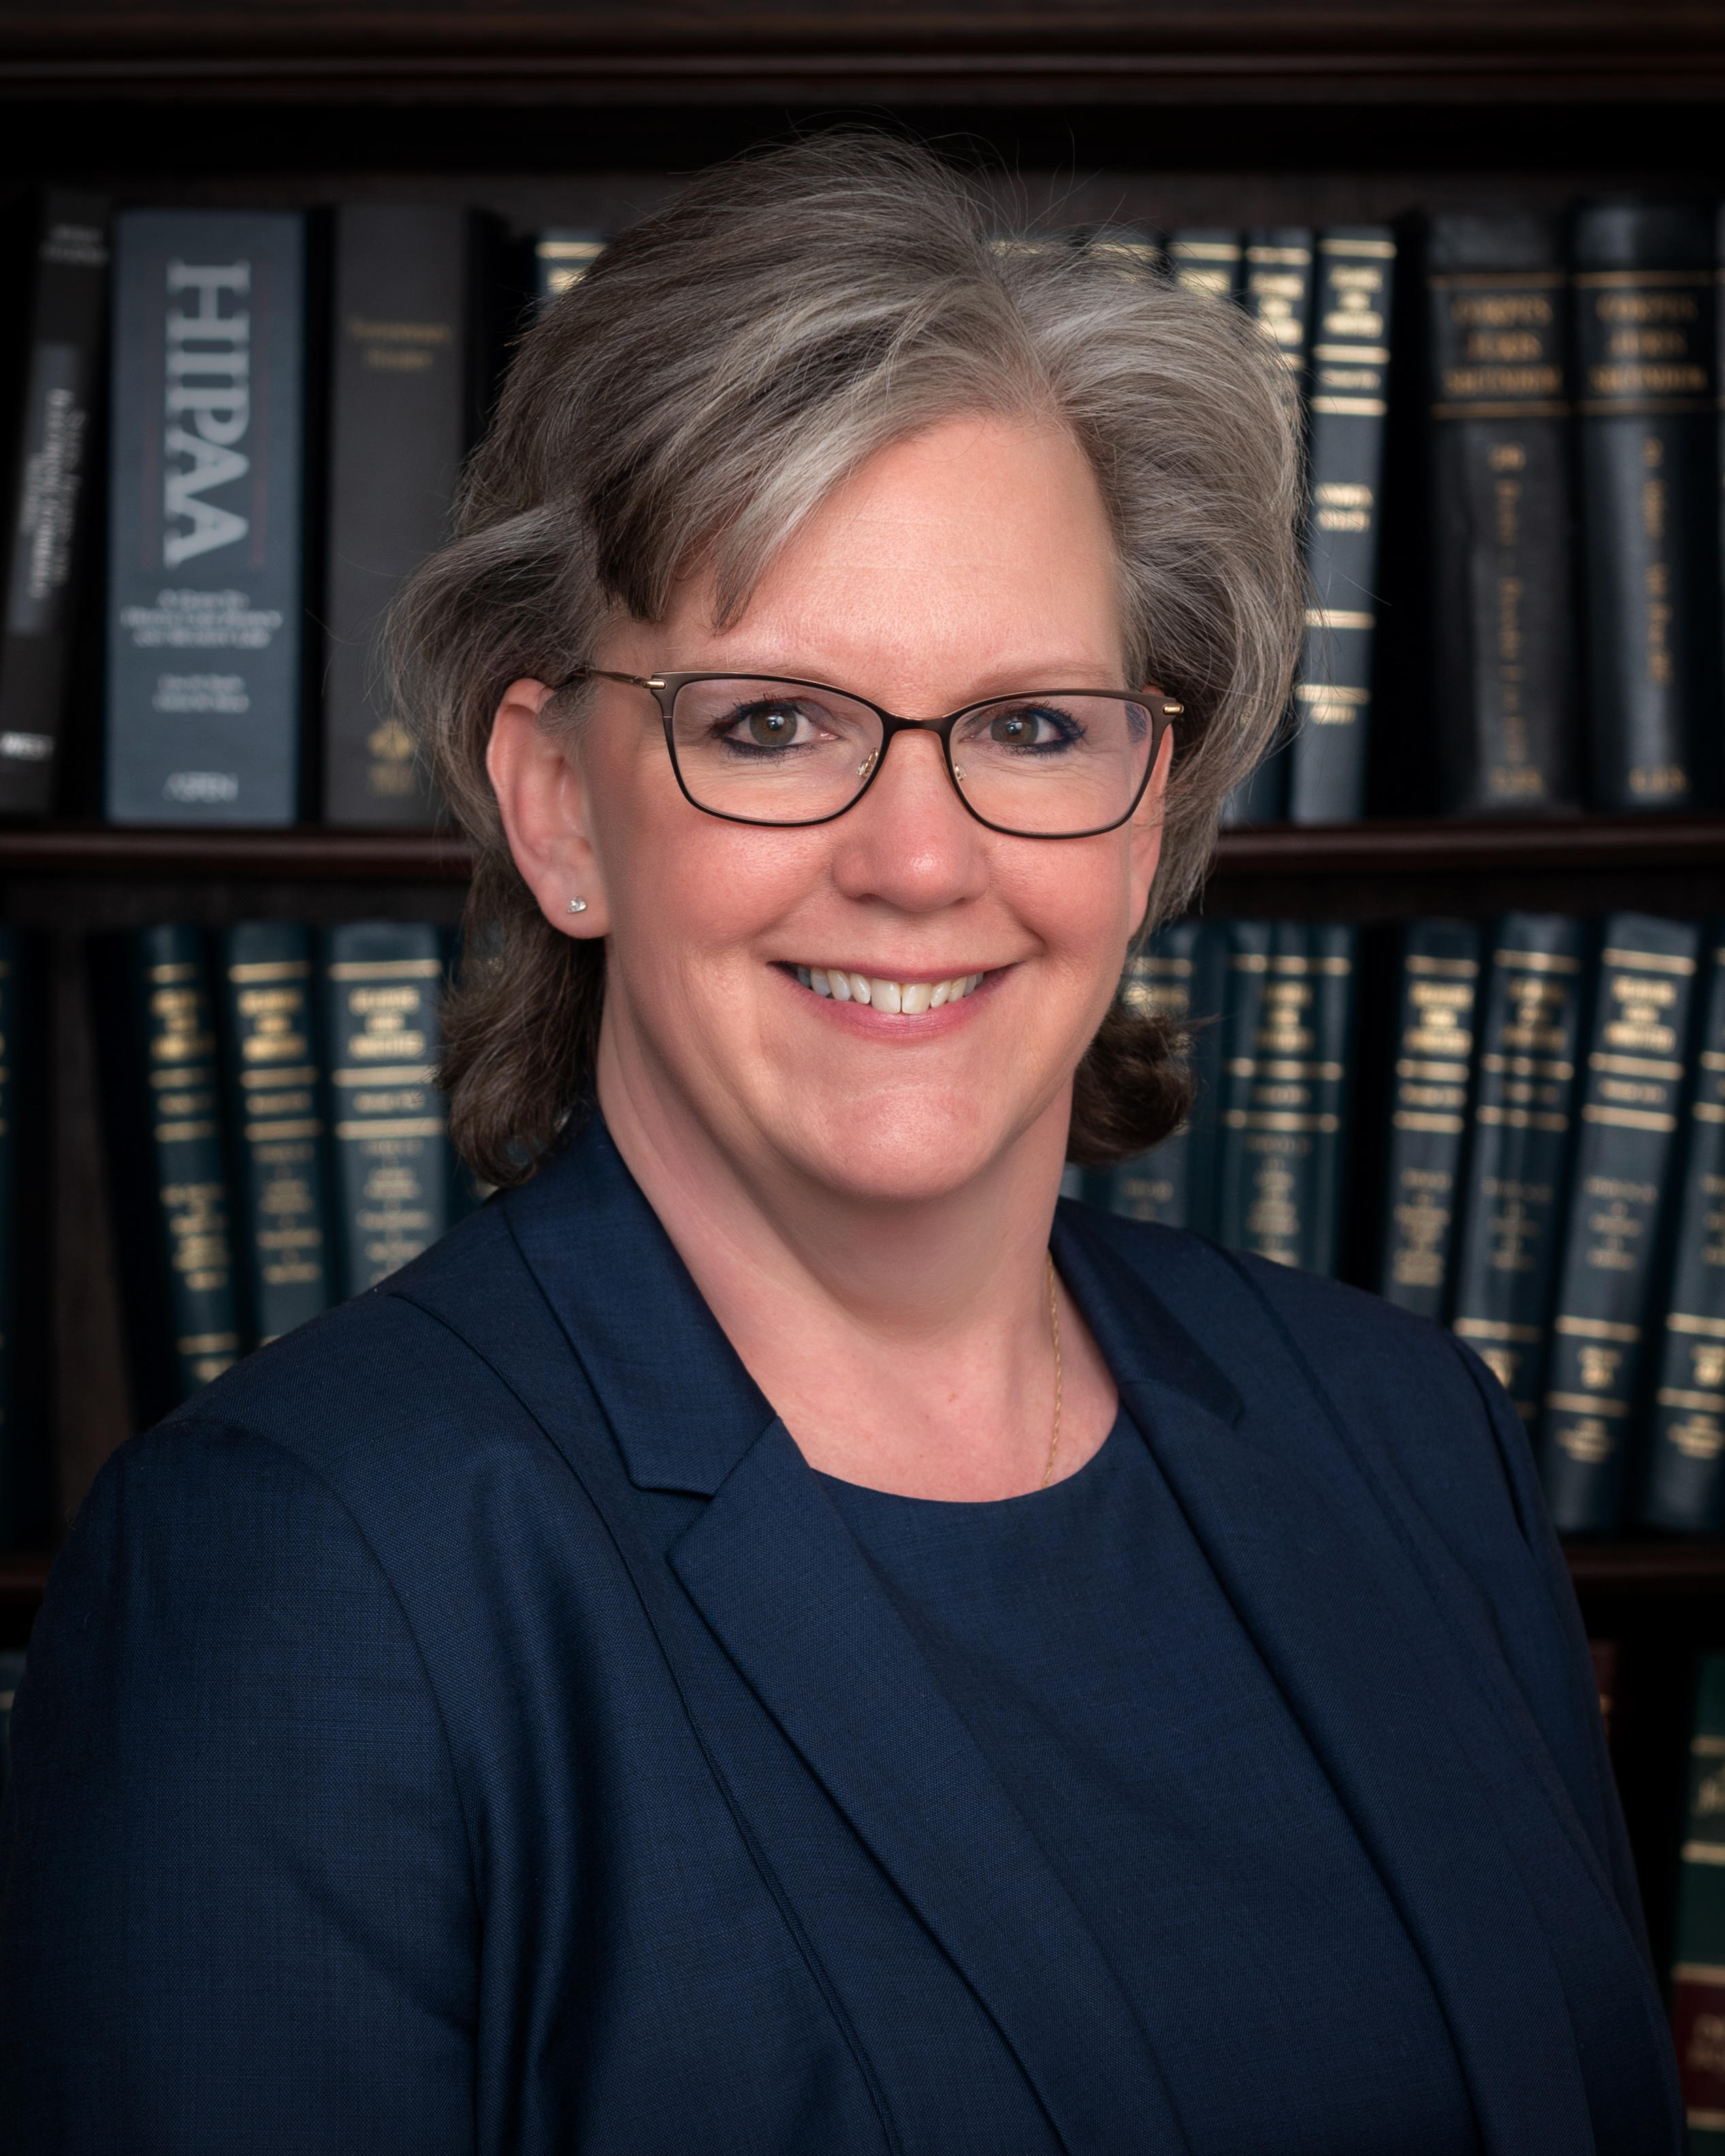 Julie Murray takes the responsibility of being an attorney very seriously and zealously represents her client’s rights. Julie has argued before the Delaware Supreme Court three times in four years and loves the challenges of appellate practice.